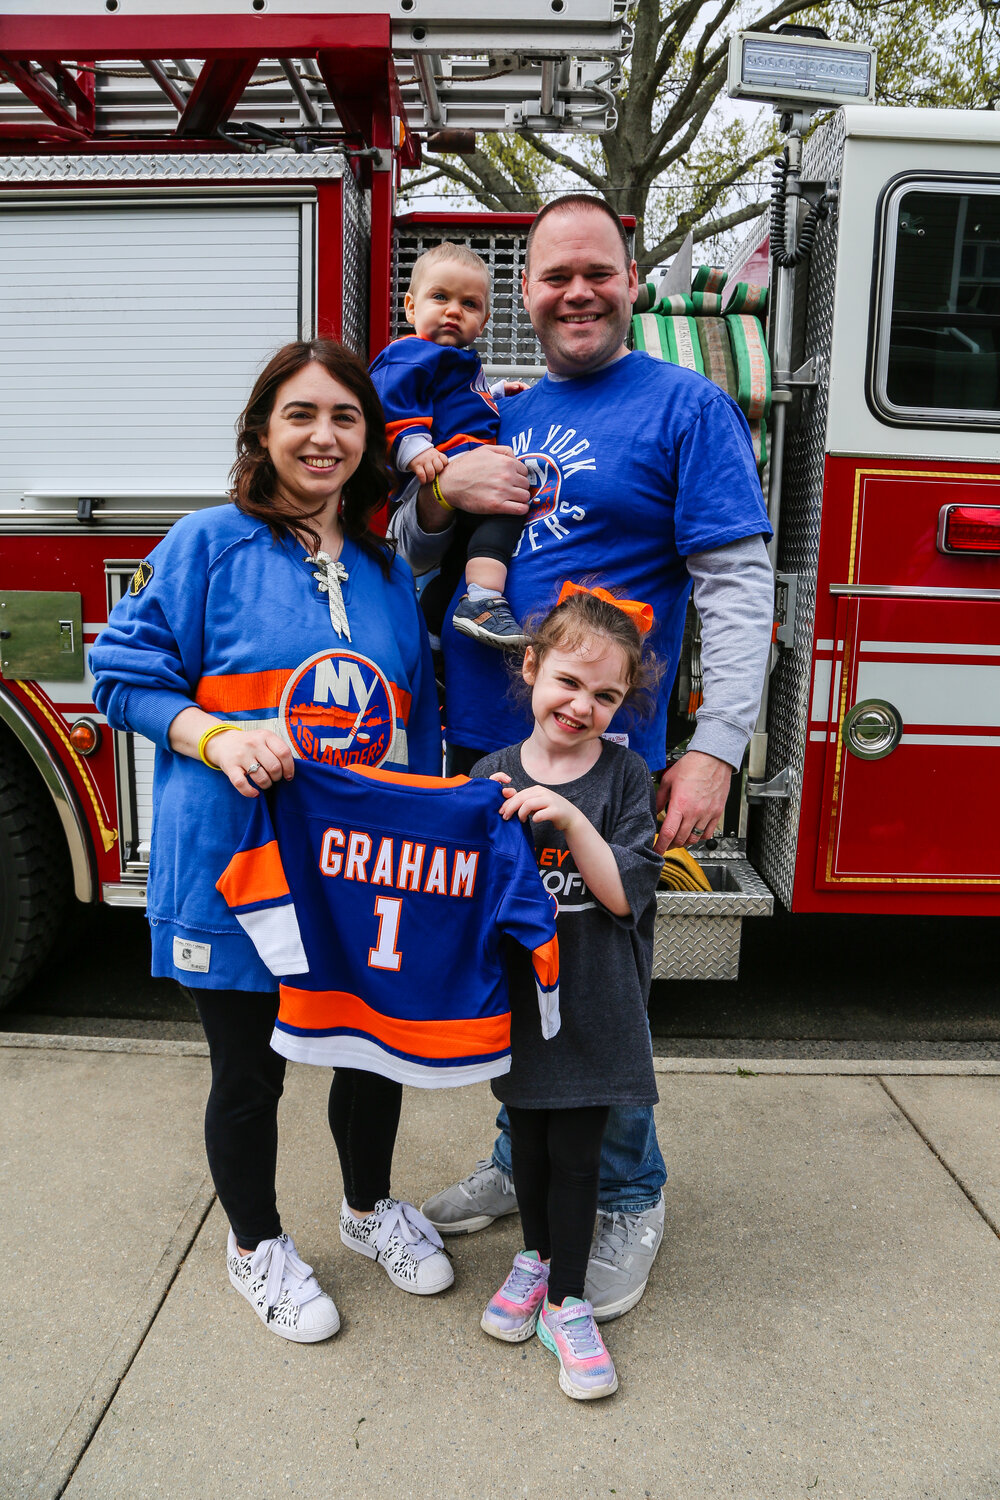 The Oceanside Graham family got a night off to see the playoffs thanks to the New York Islanders.